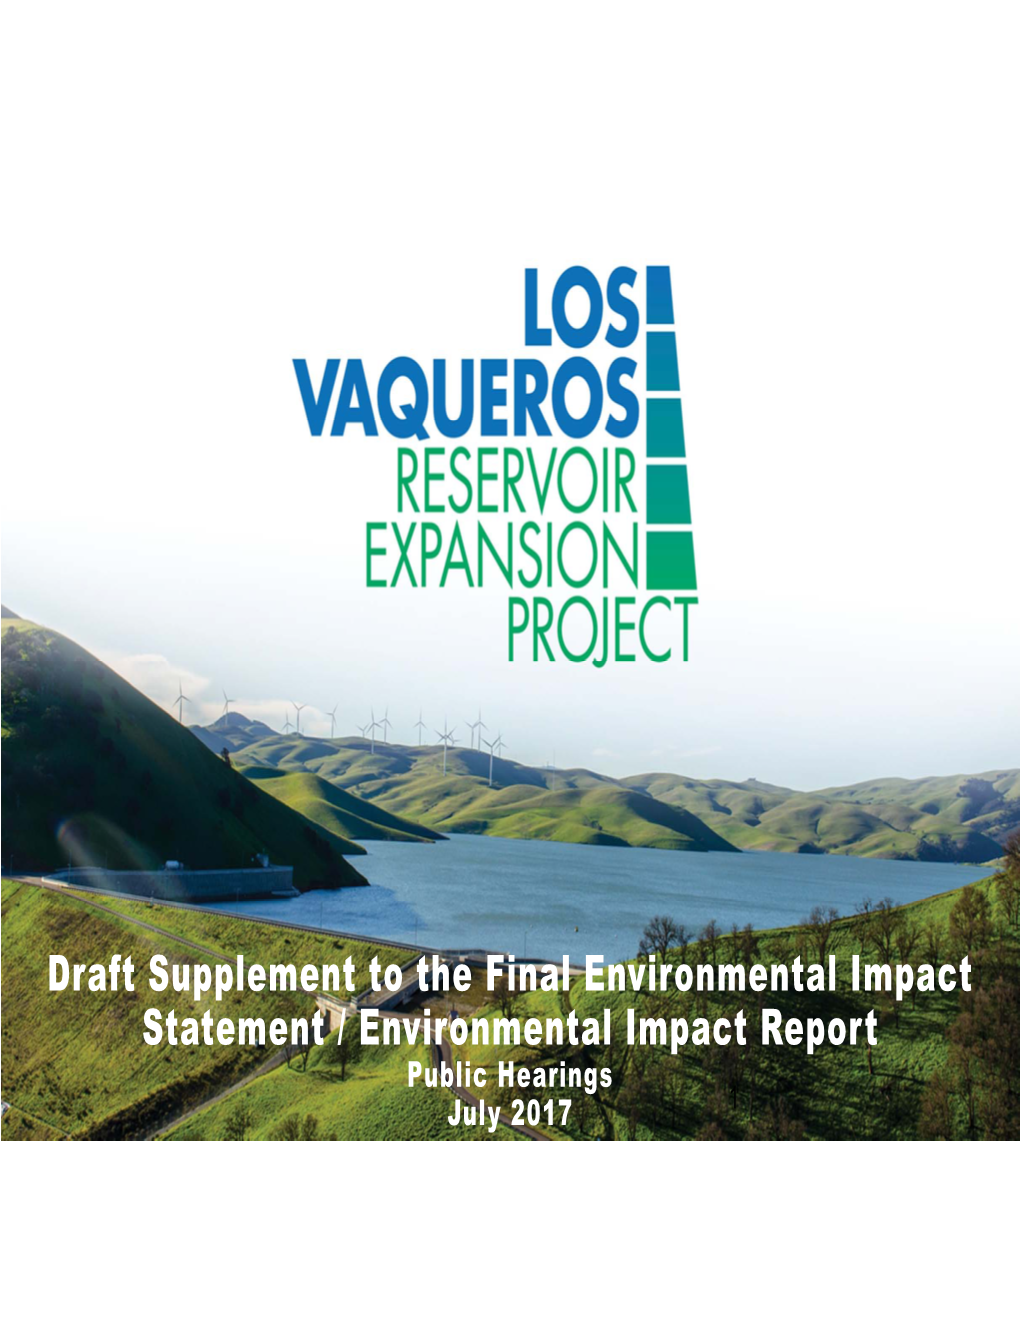 Draft Supplement to the Final Environmental Impact Statement / Environmental Impact Report